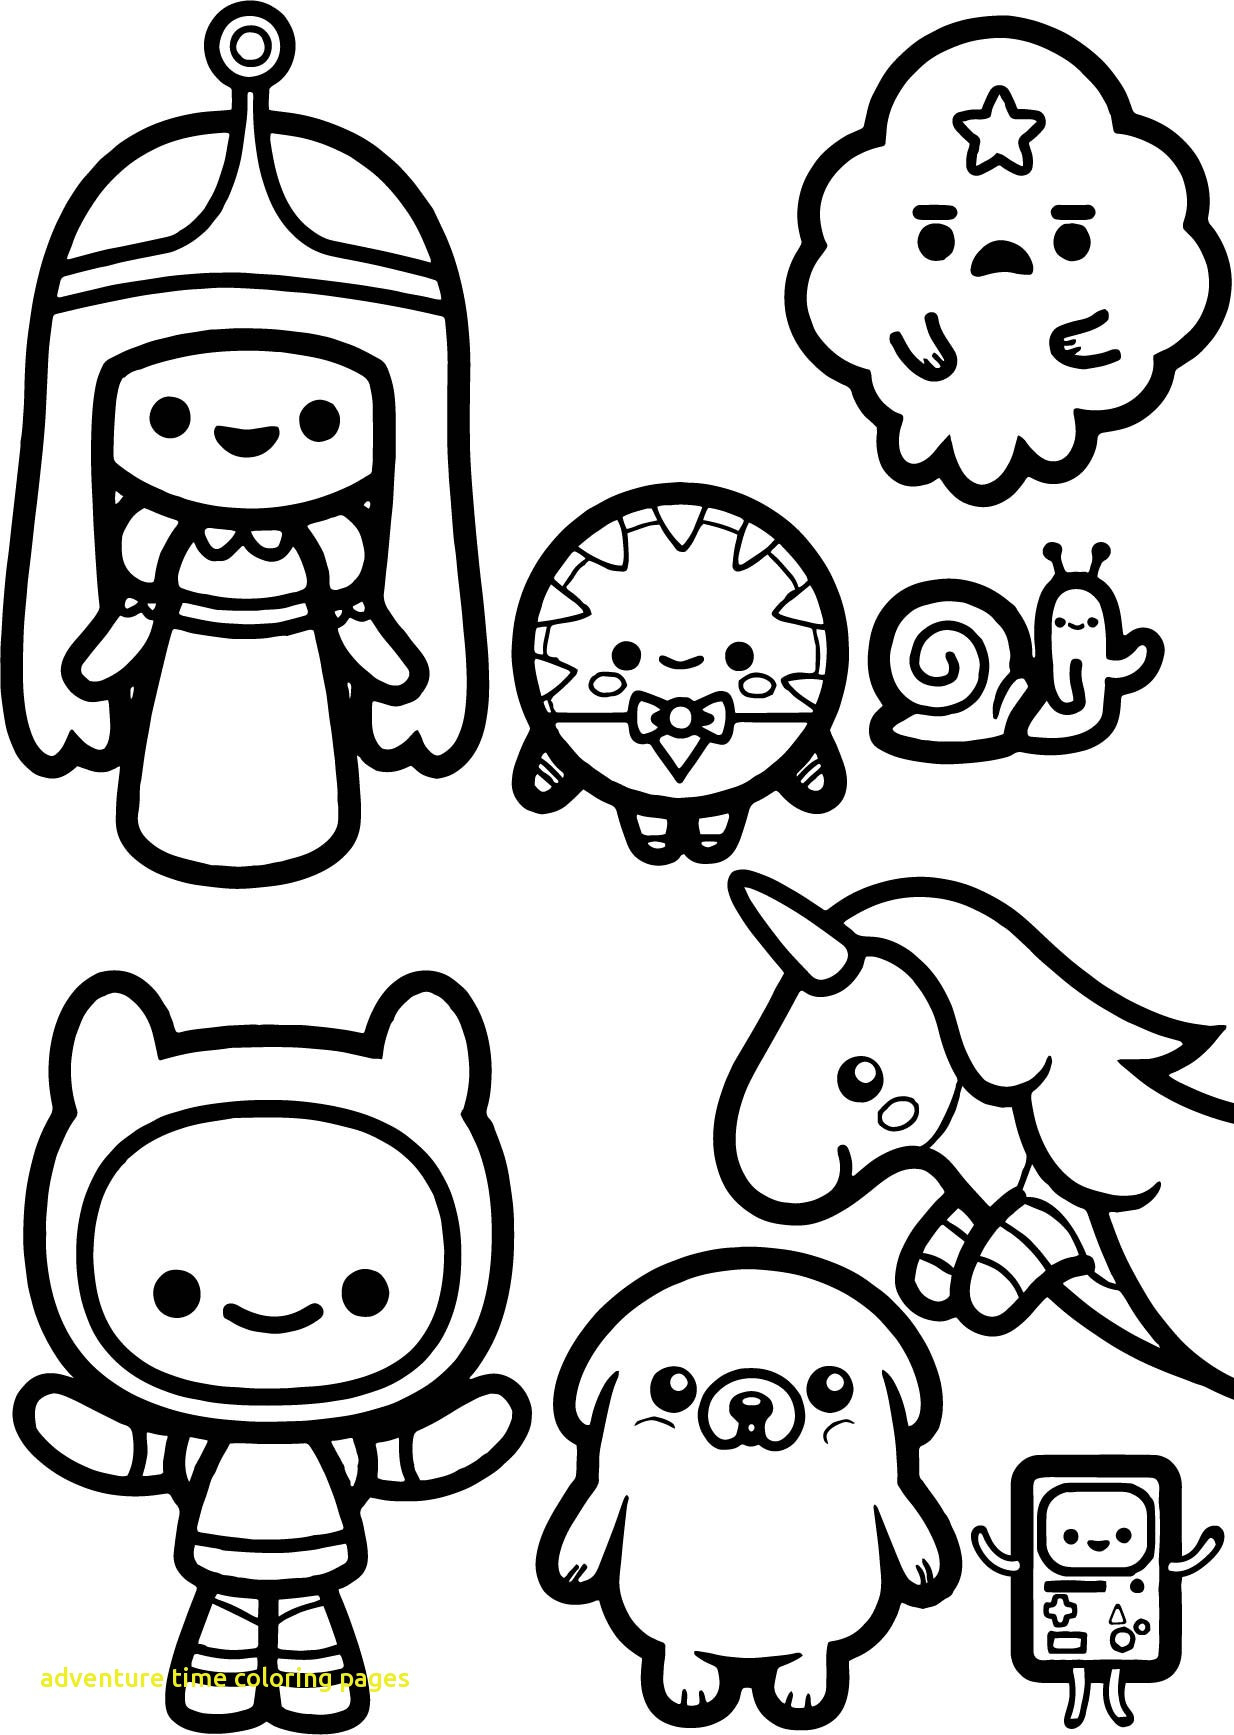 Printable Adventure Time Coloring Pages Growth Adventure Time With Finn And Jake Coloring Pages To Print All